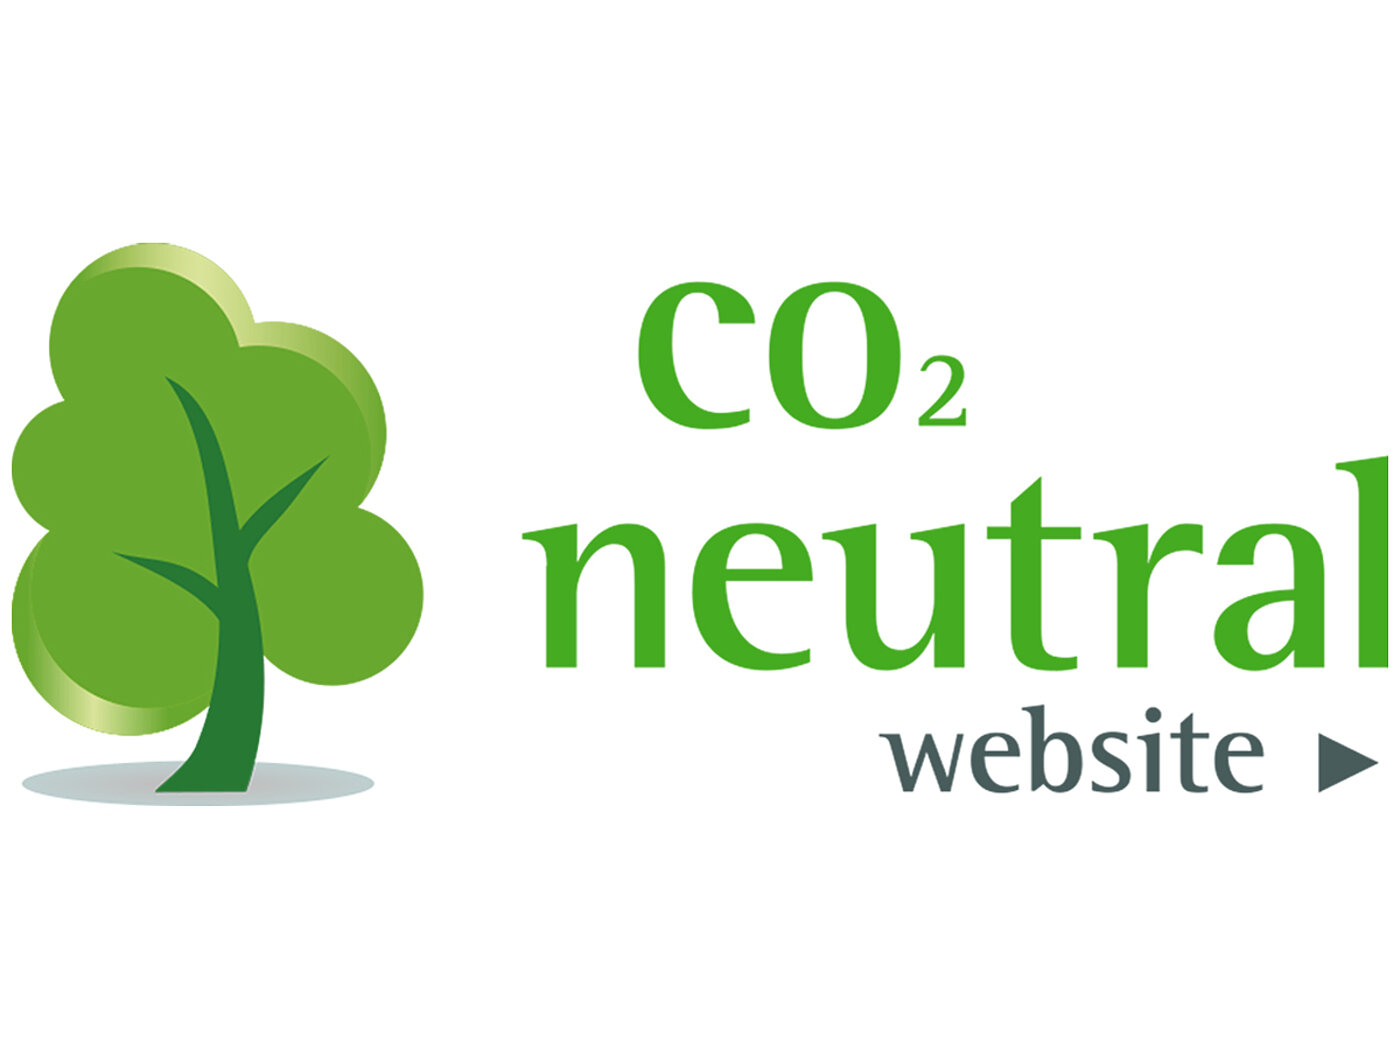 a logo with the text message 'CO2-neutral website' in green letters, featuring a stylized green tree that symbolizes growth and green friendliness, all depicted on white background